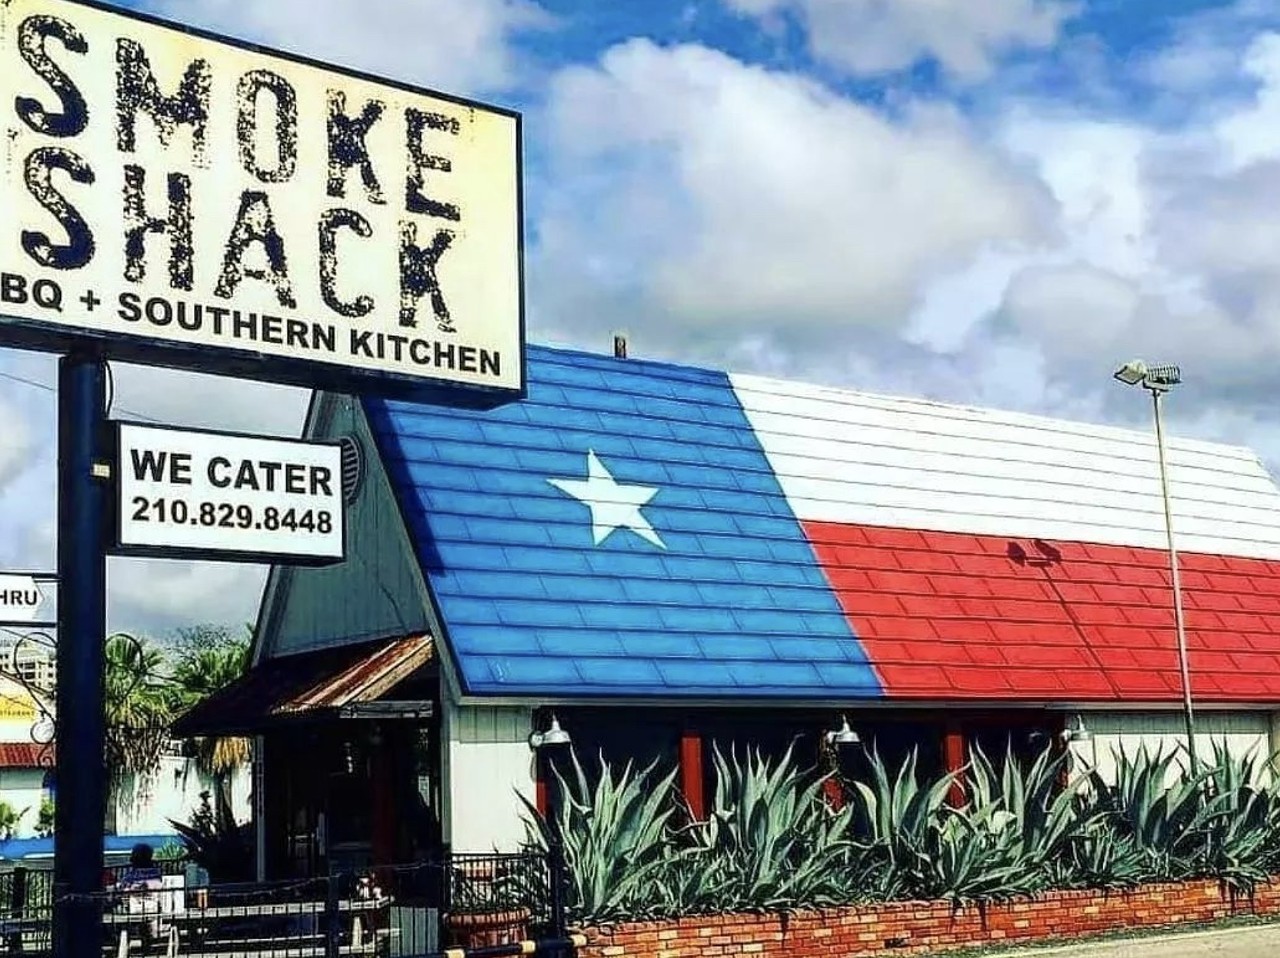 https://media1.sacurrent.com/sacurrent/imager/20-iconic-san-antonio-bars-and-restaurants-everyone-should-try-at-least-once/u/zoom/30735058/smoke_shack.jpg?cb=1702165477